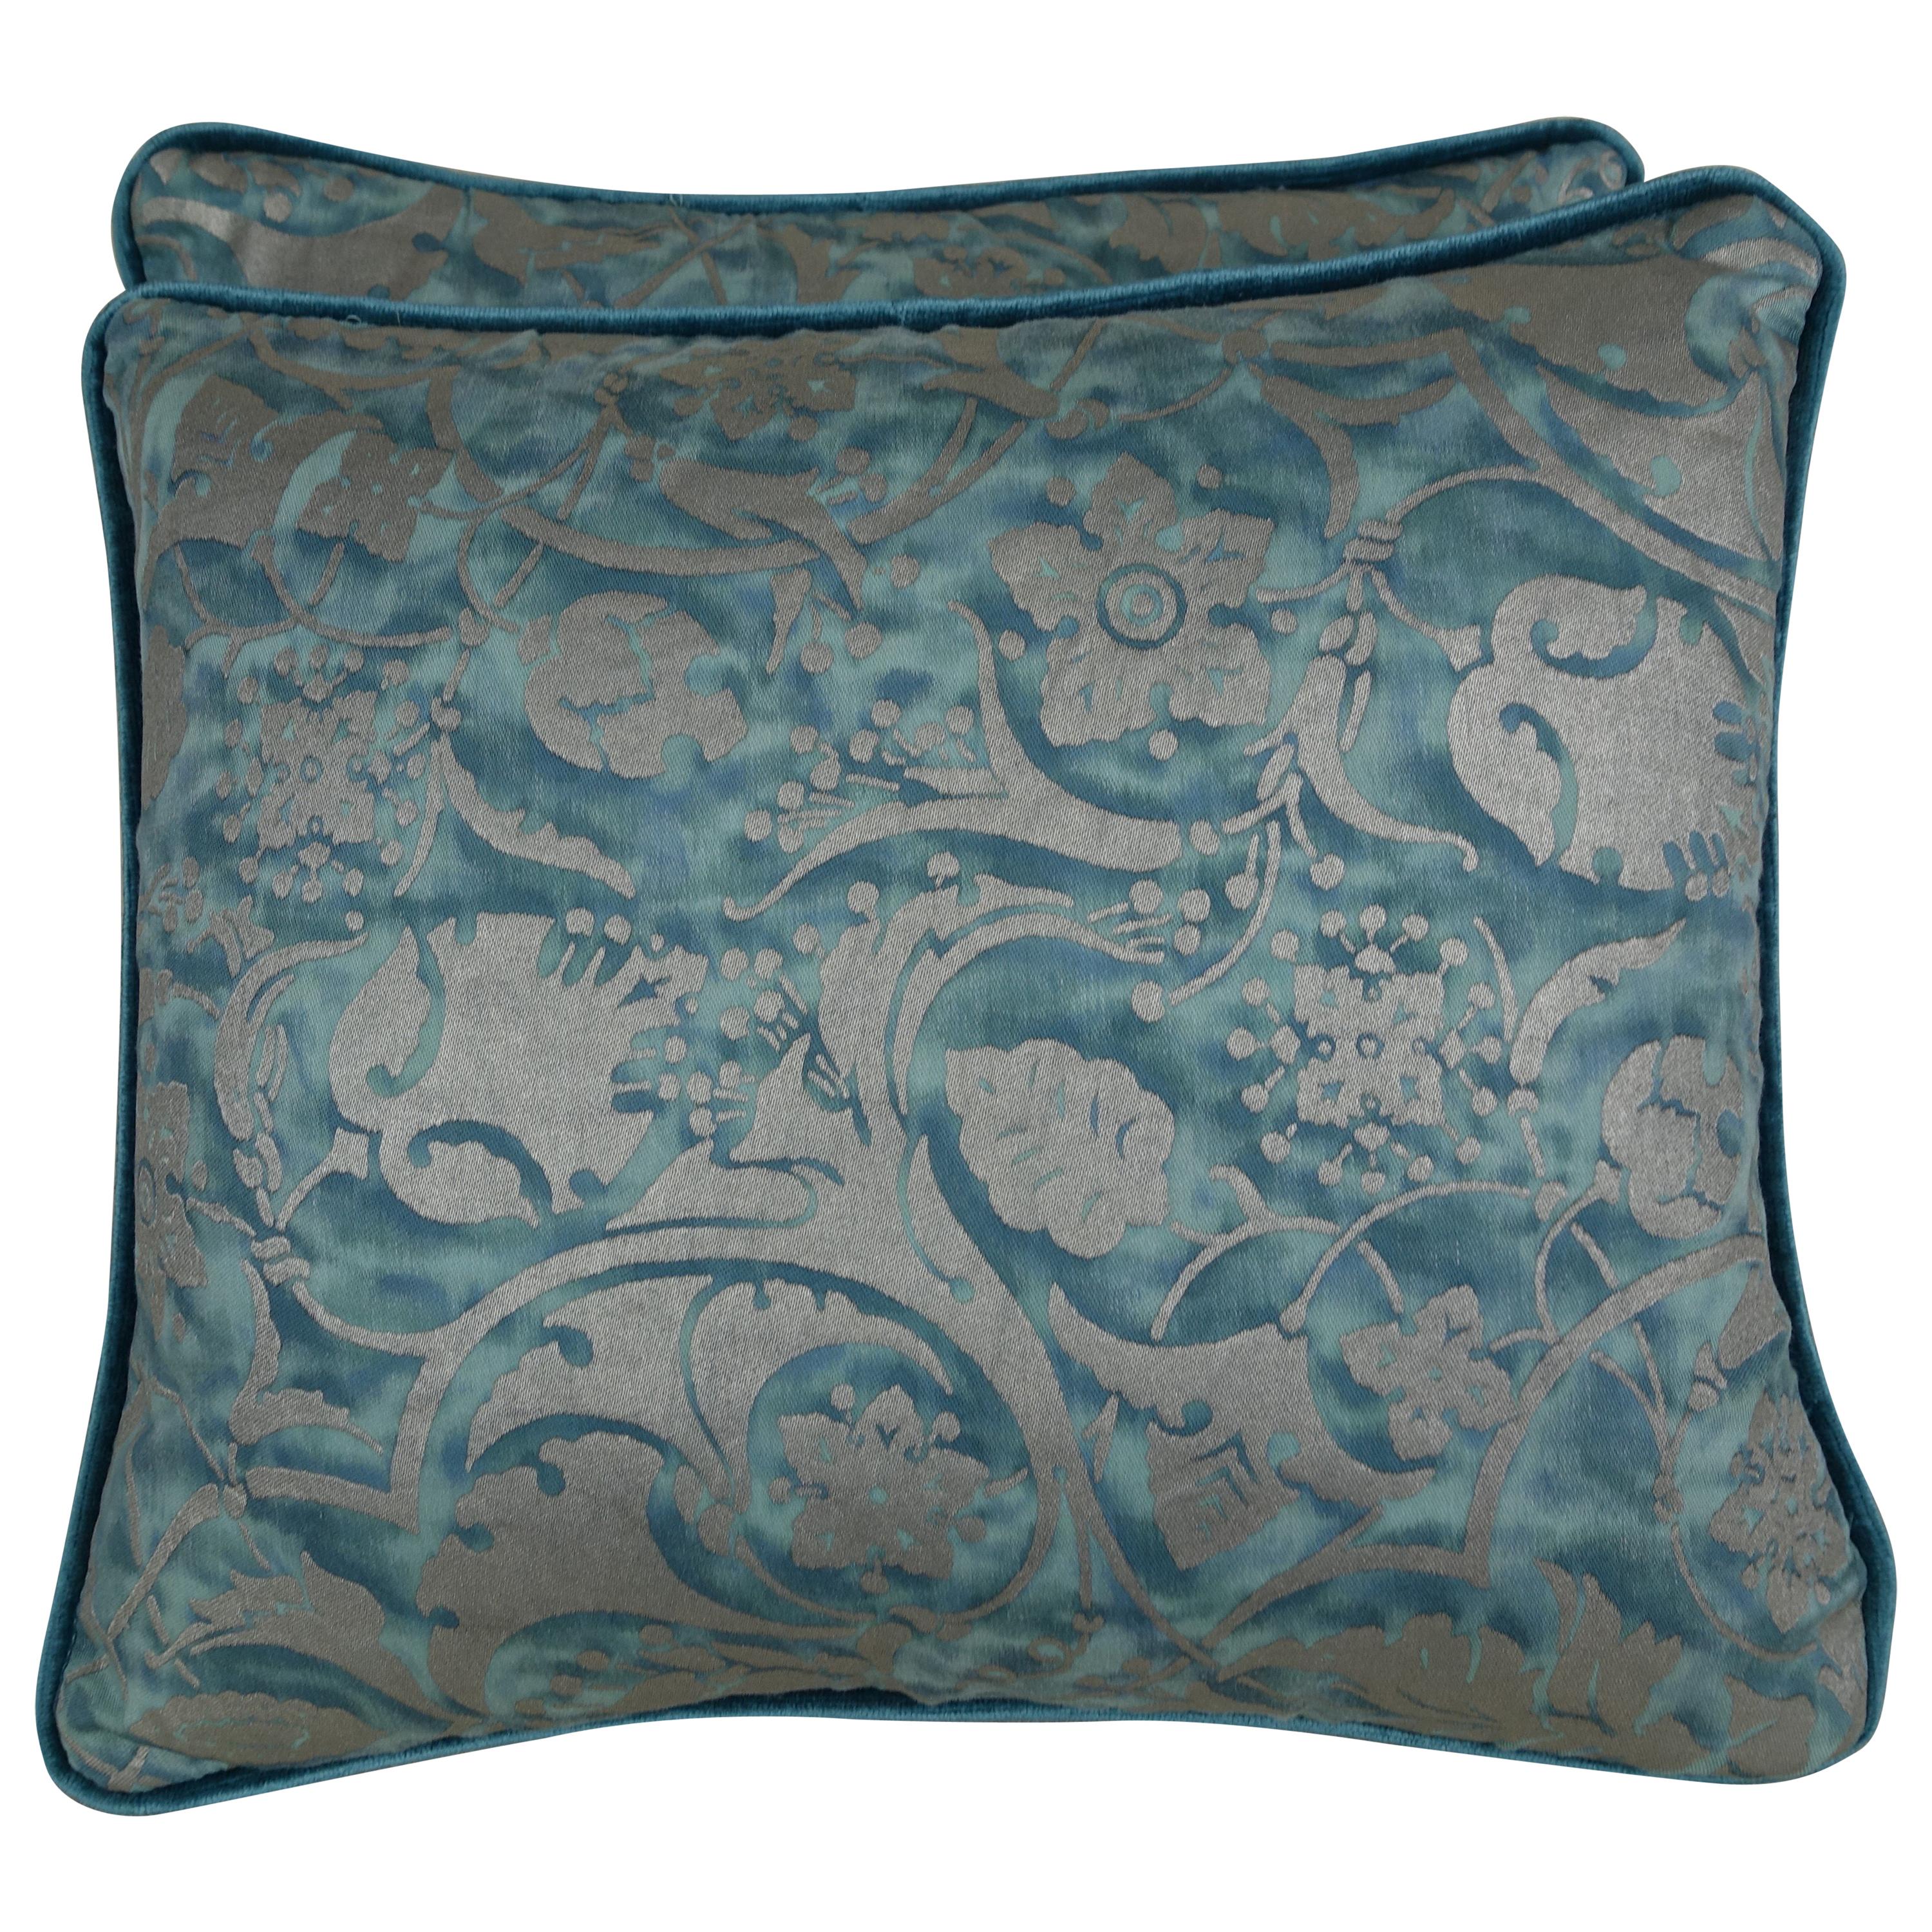 Persepolis Patterned Fortuny Textile Pillows, a Pair